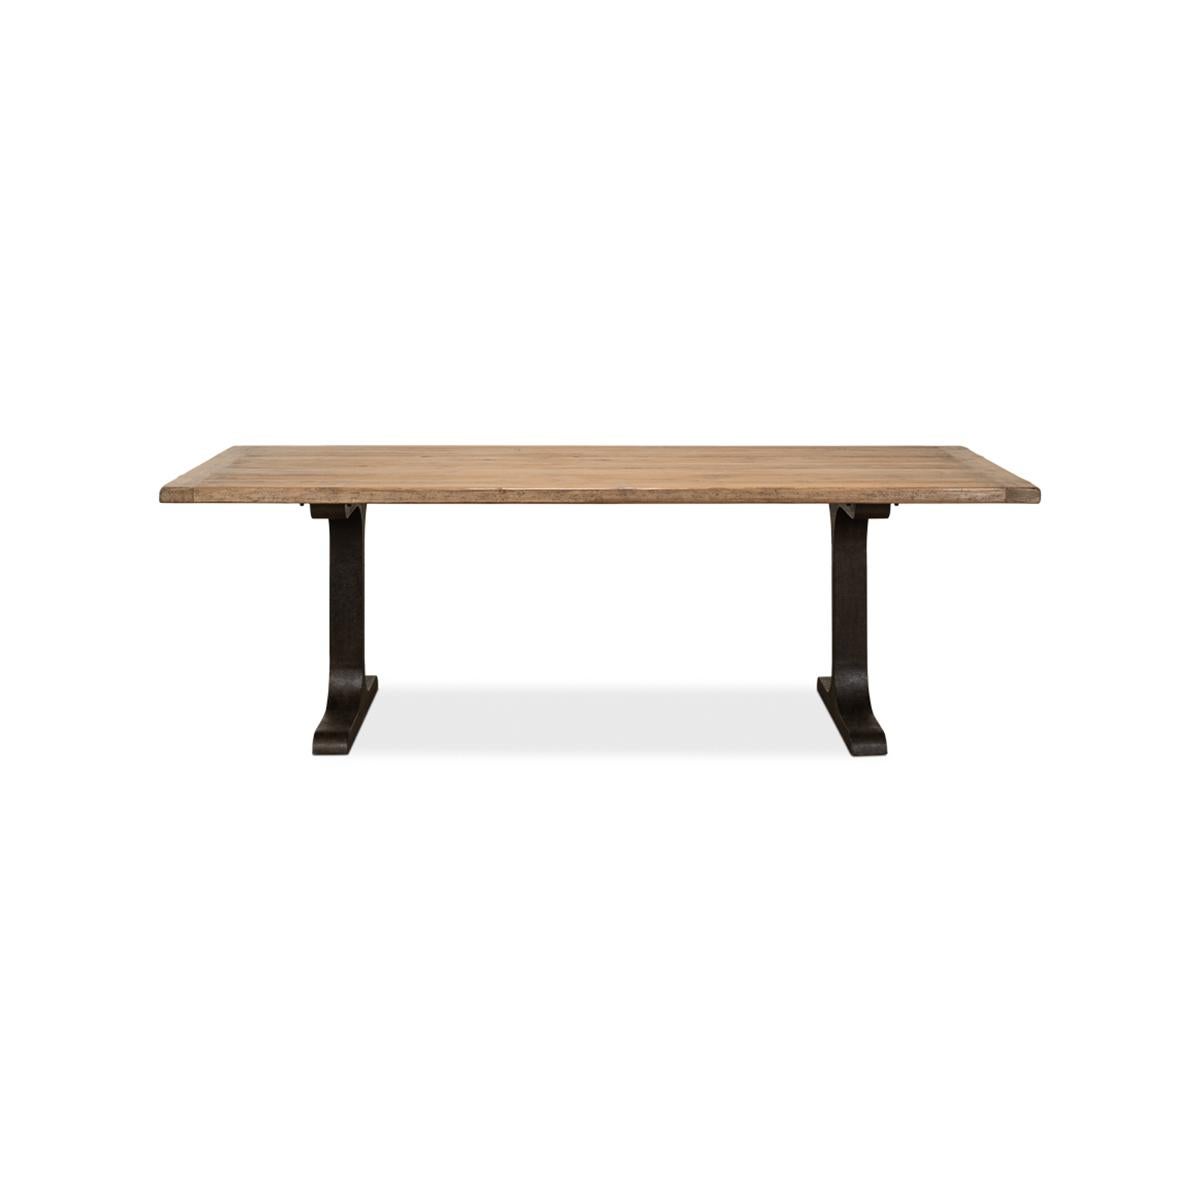 With a reclaimed pine top with breadboard ends, raised on a trestle form iron base.

The reclaimed pine table top is finished naturally to show off the woods' age and rich patina. Functional, dramatic, and simply stunning.

Dimensions: 94